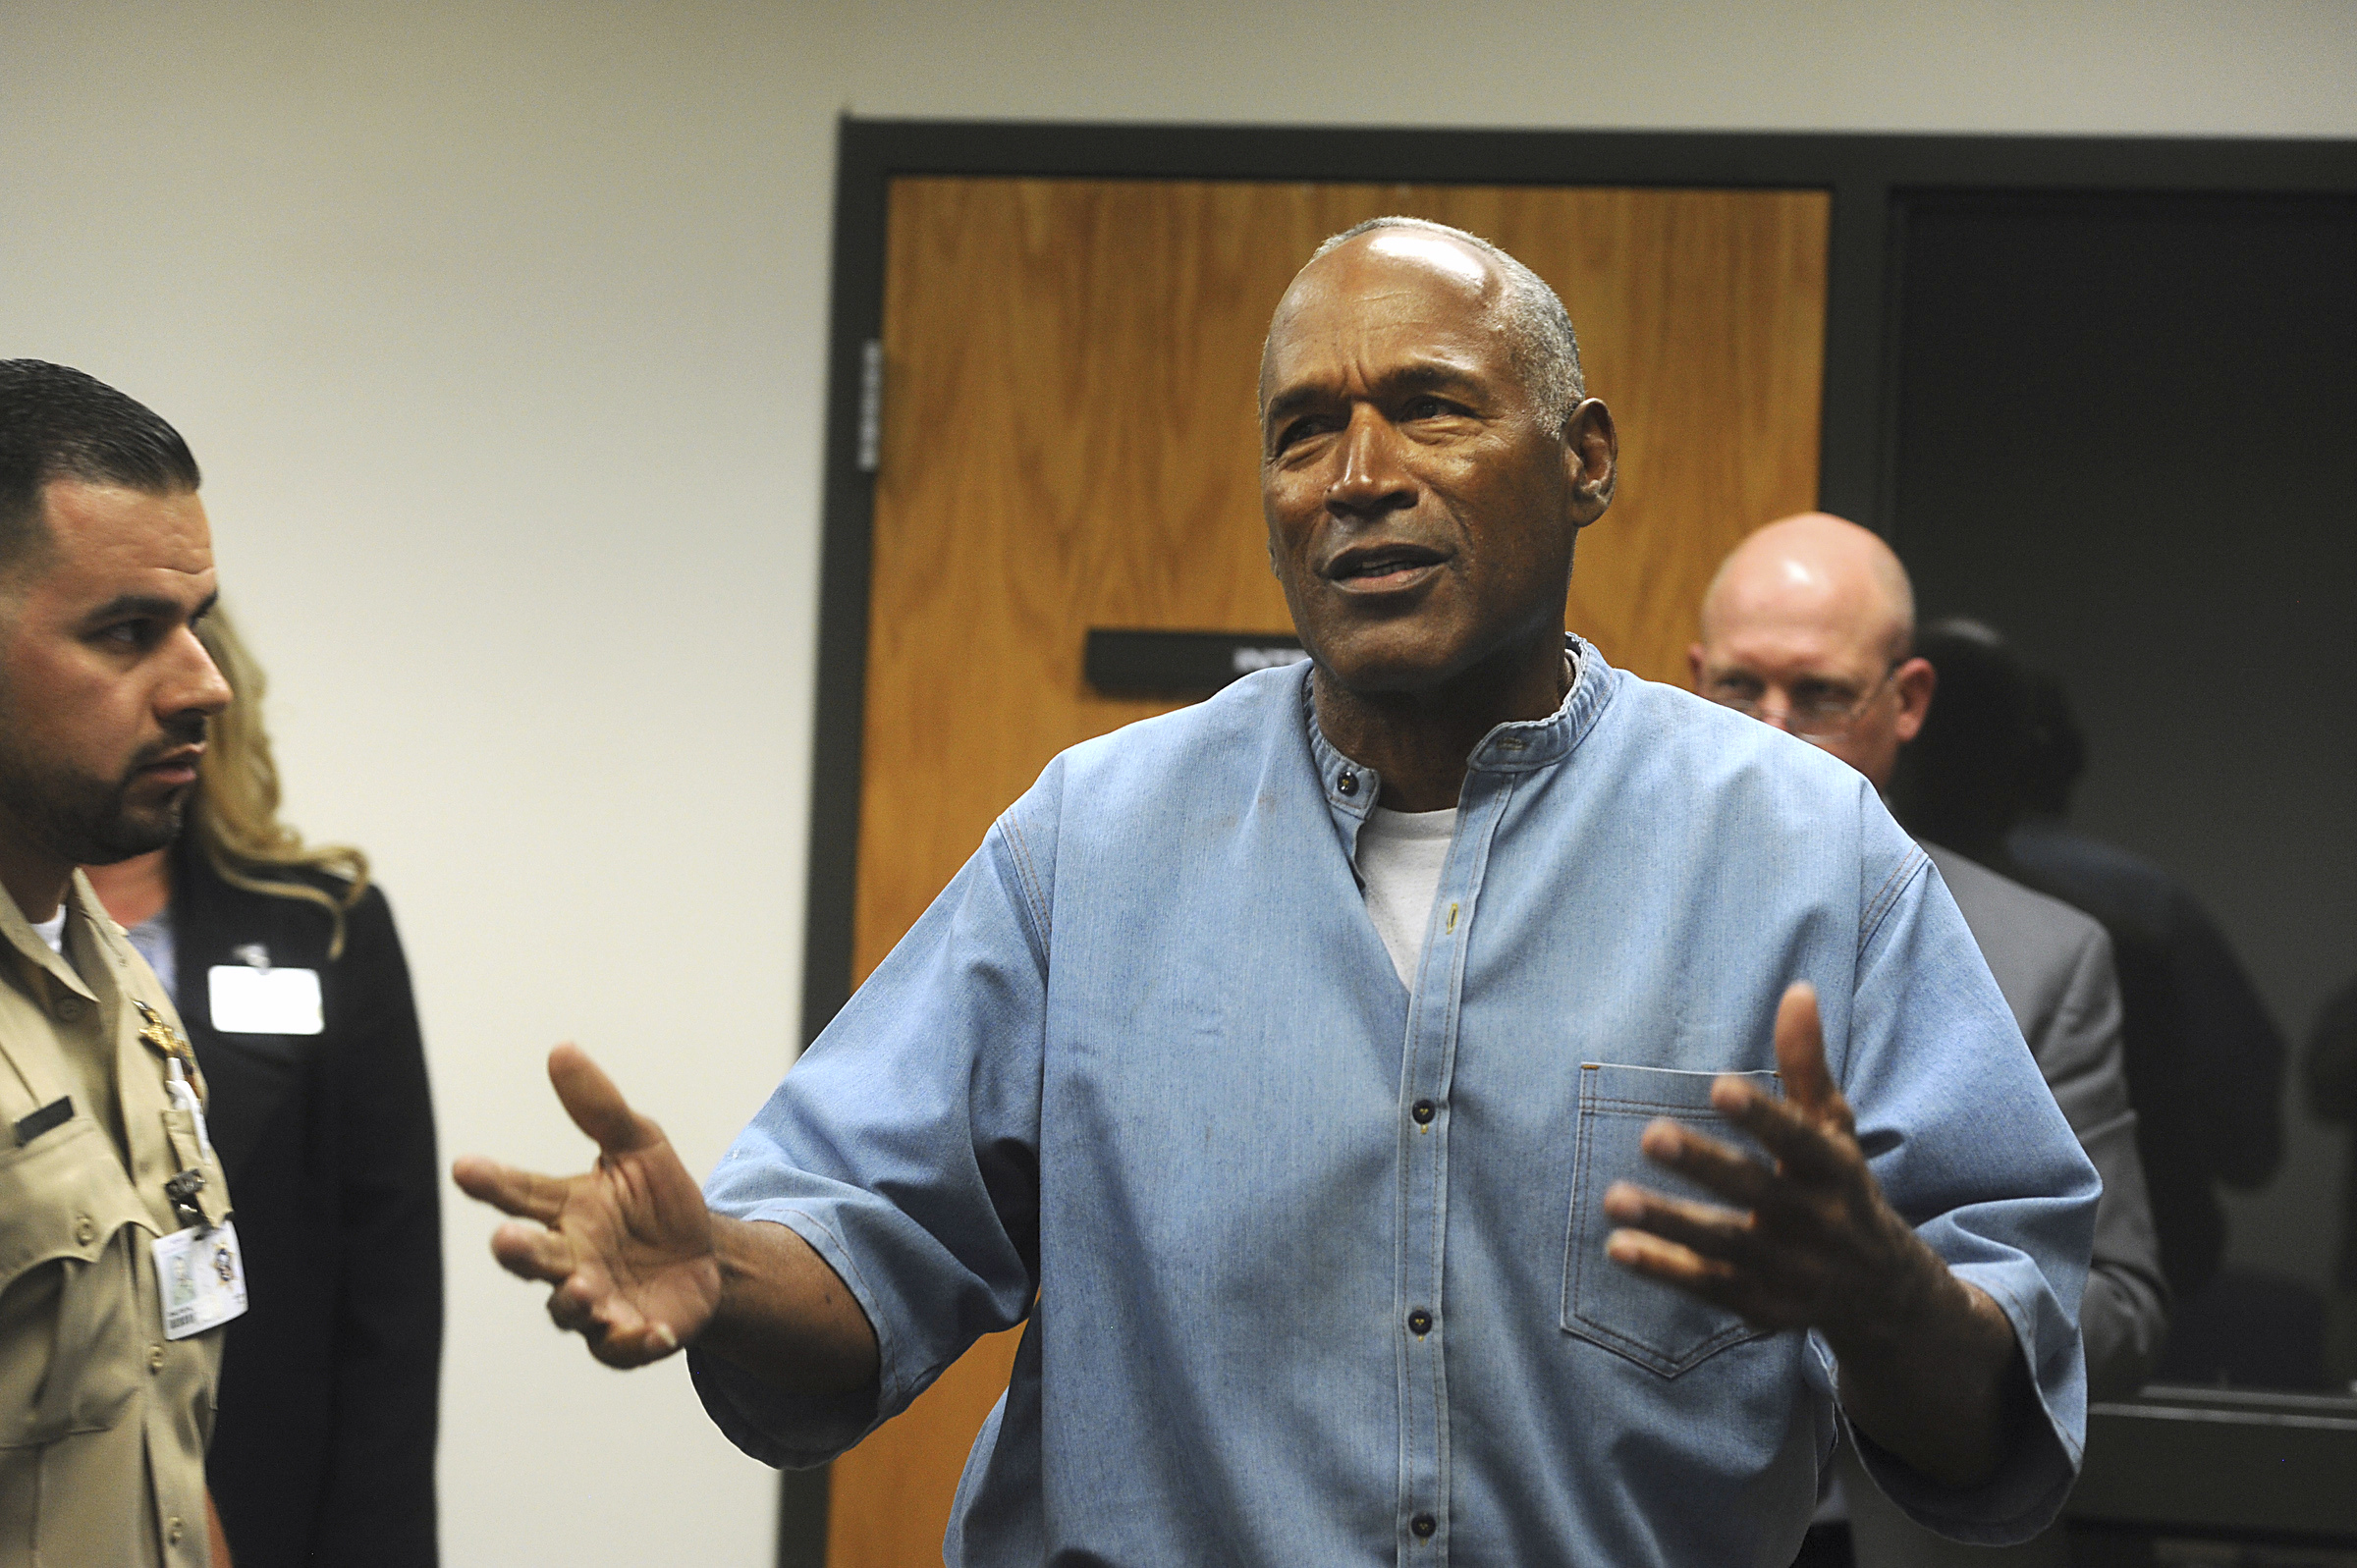 Buffalo Bills give OJ Simpson's old number away for first time